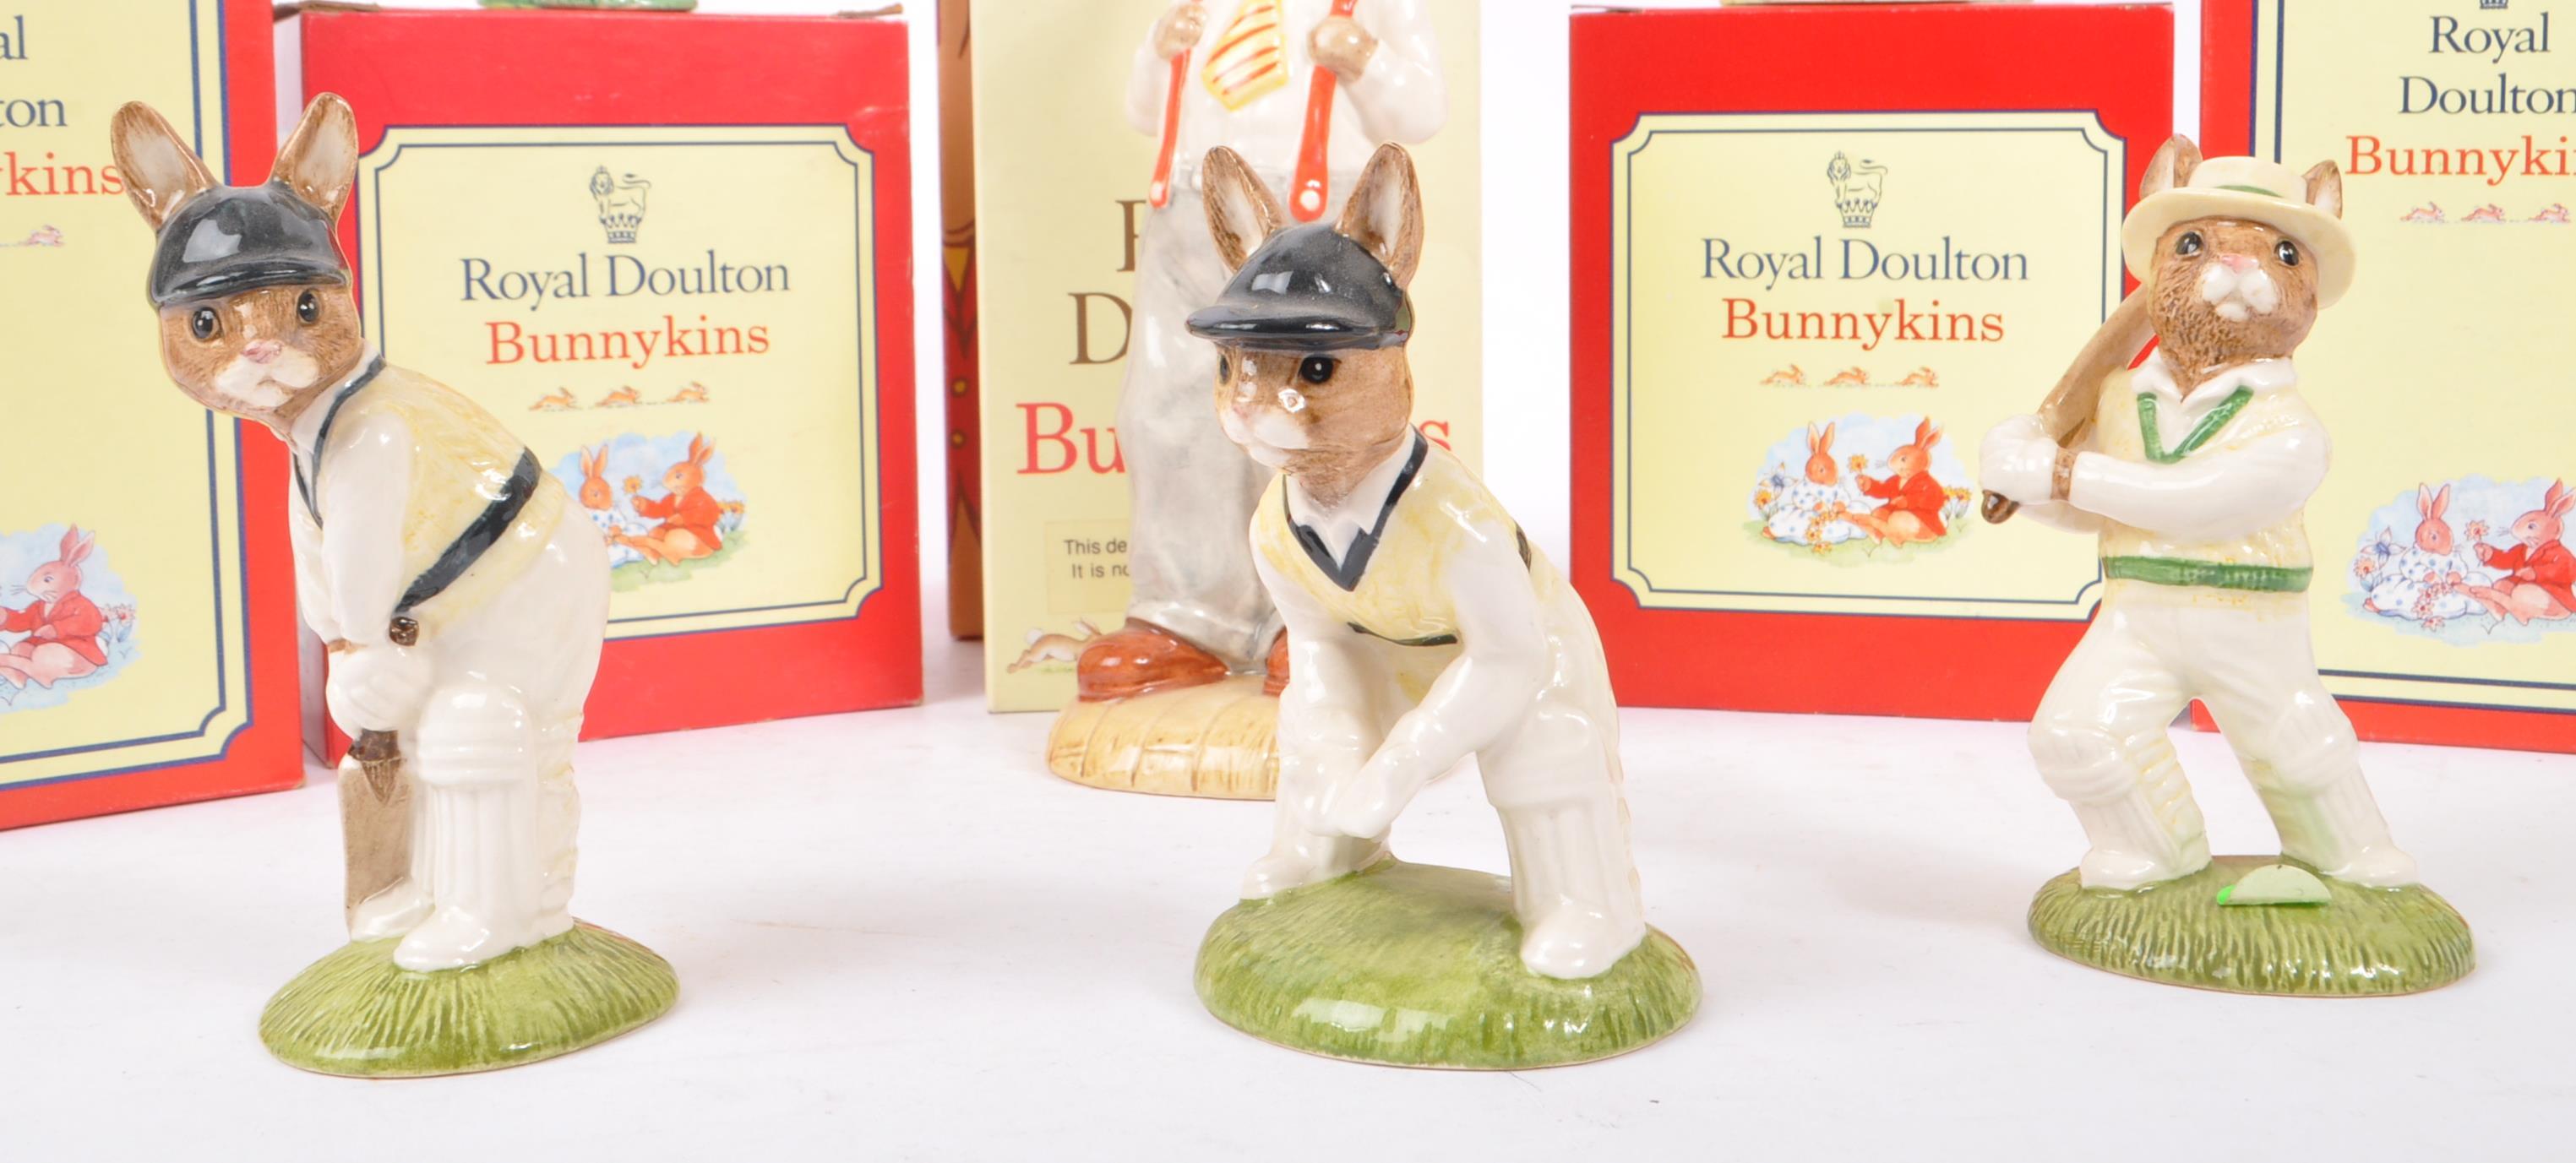 ROYAL DOULTON - BUNNYKINS - COLLECTION OF PORCELAIN FIGURES - Image 2 of 7